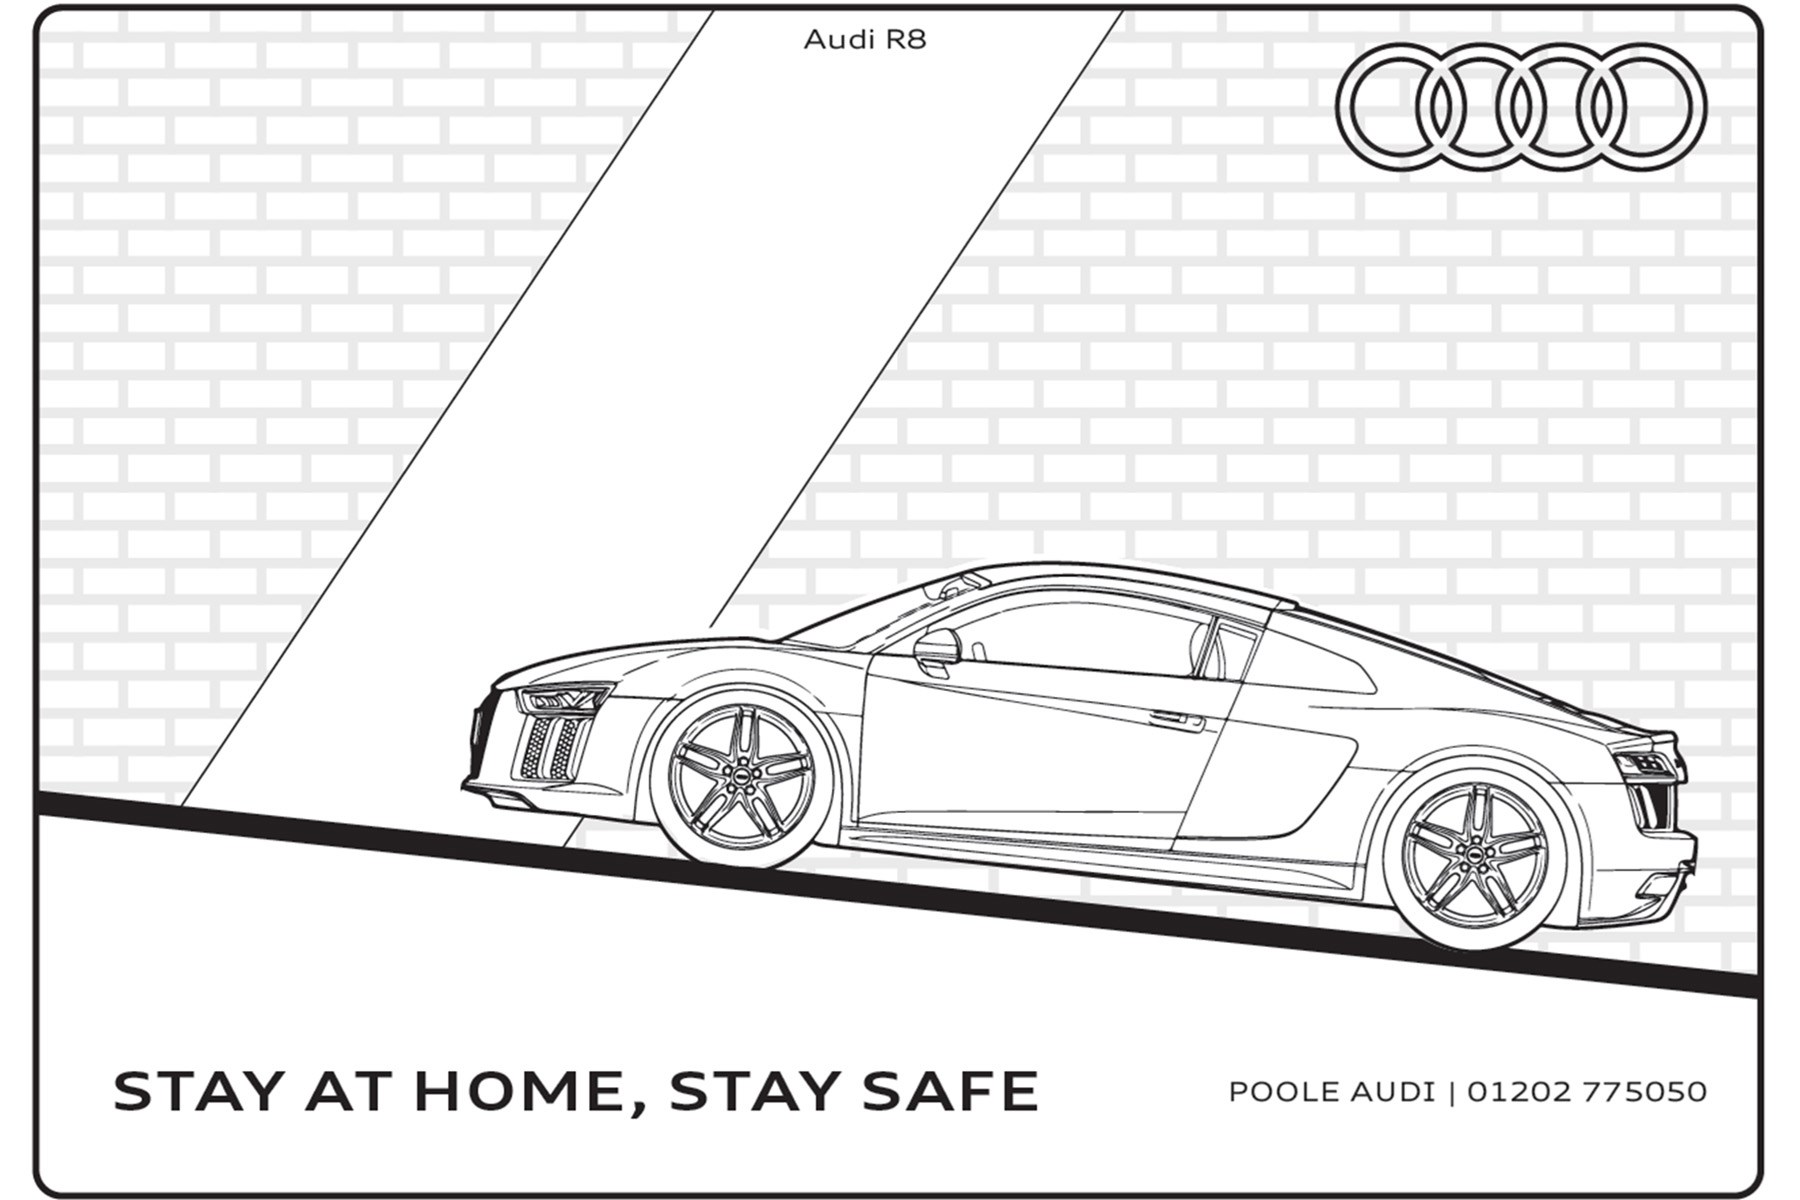 4100 Collections Volvo Car Coloring Pages  Free